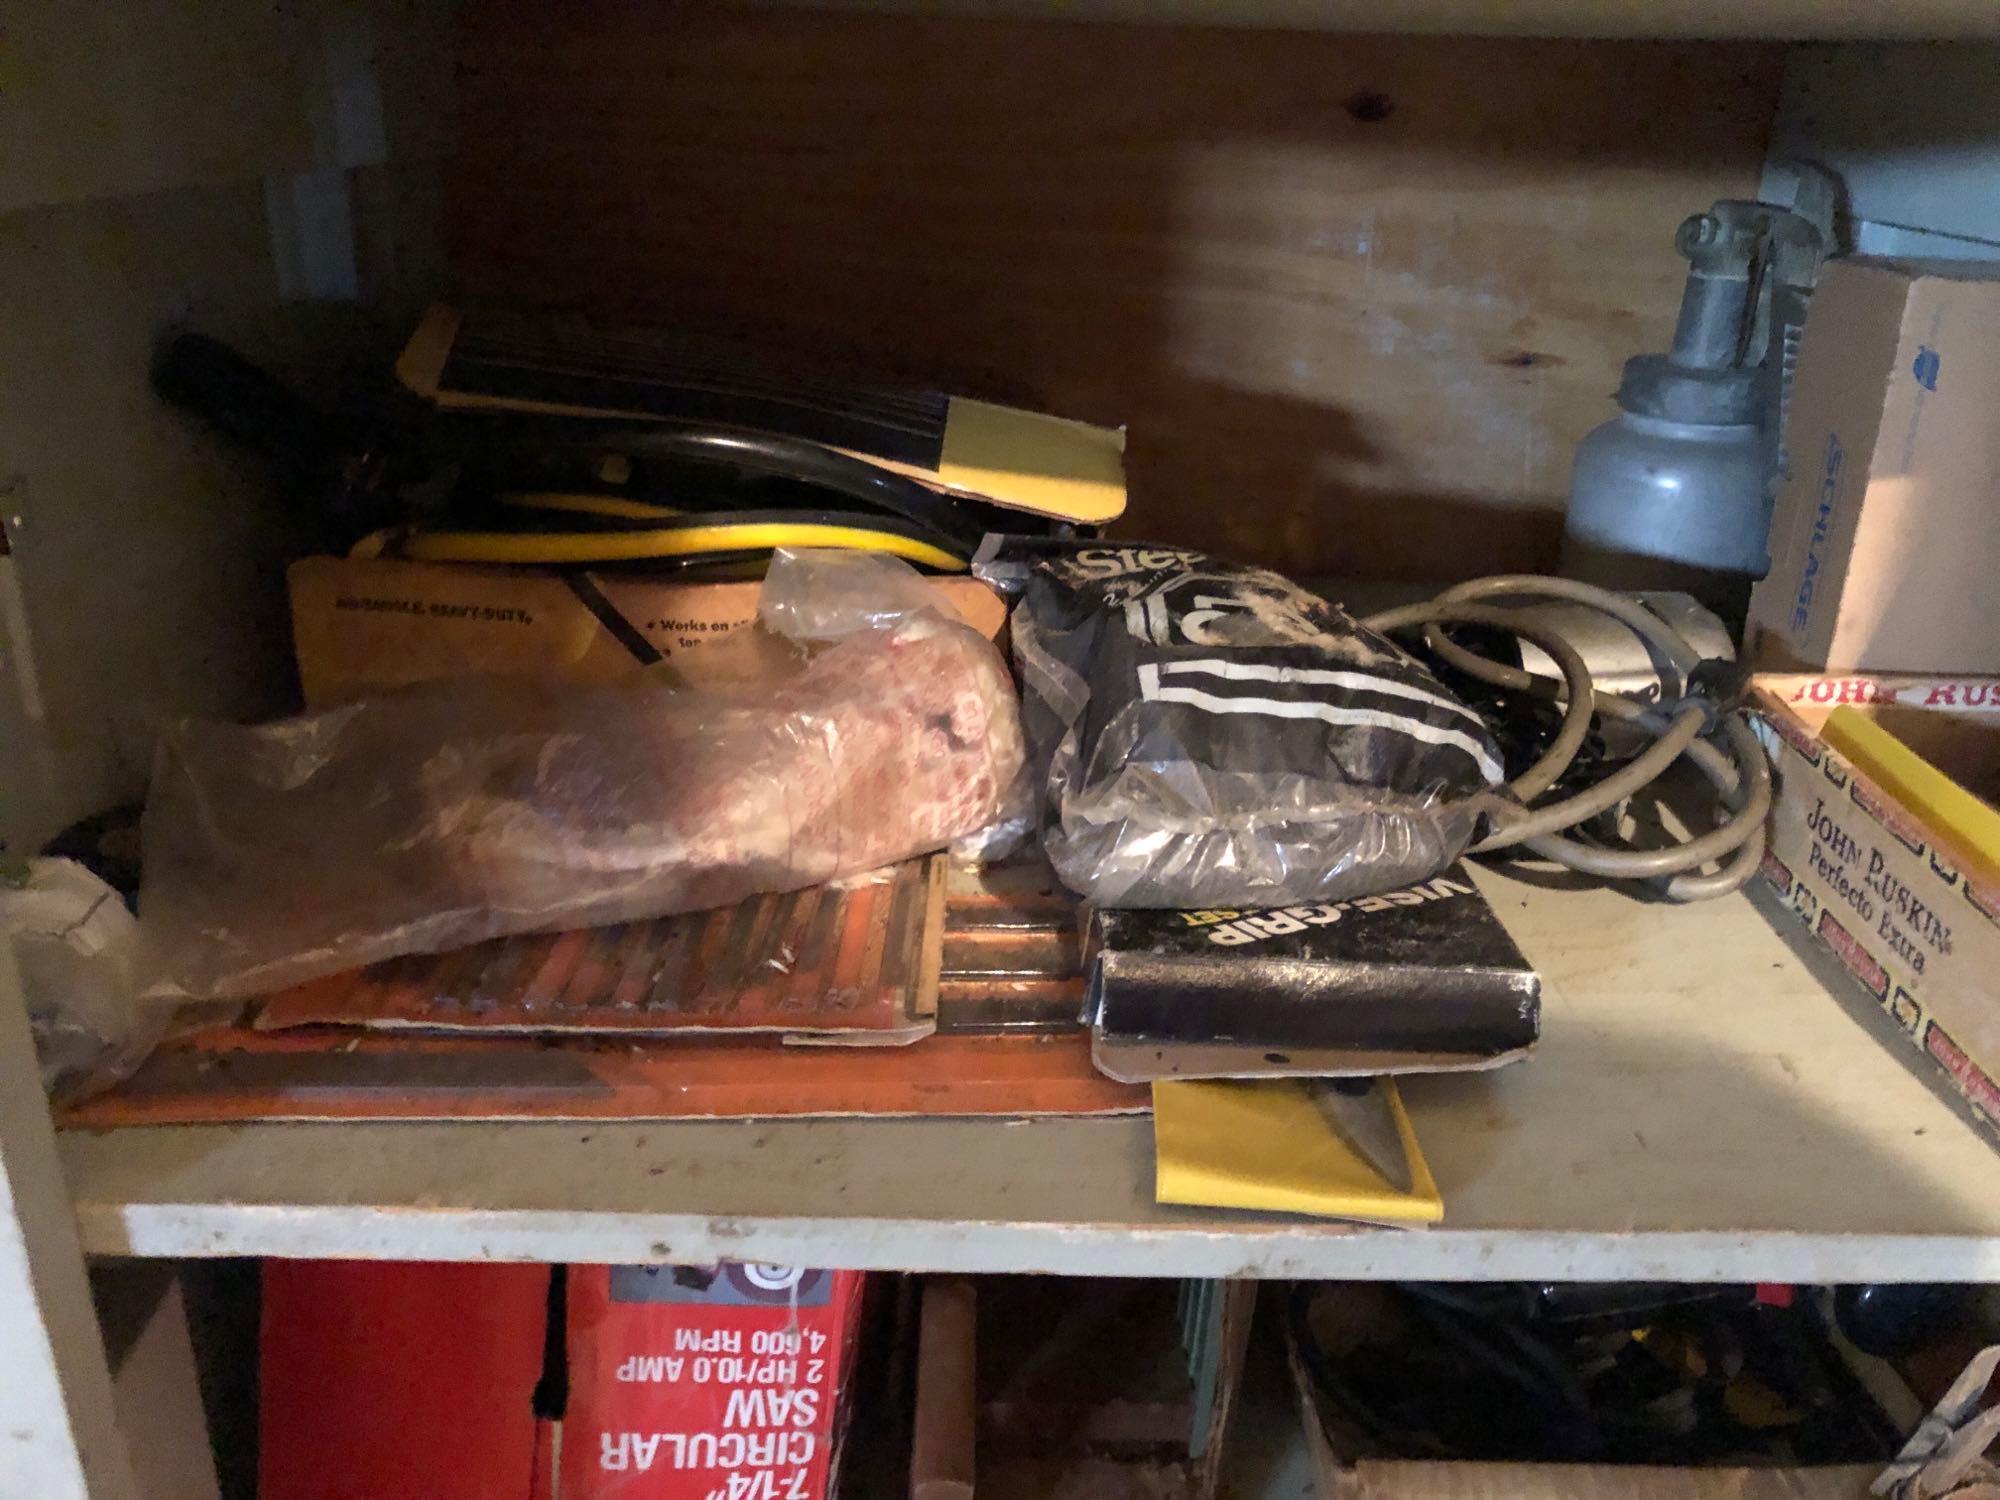 contents of cabinet, power tools, wrenches, hardware